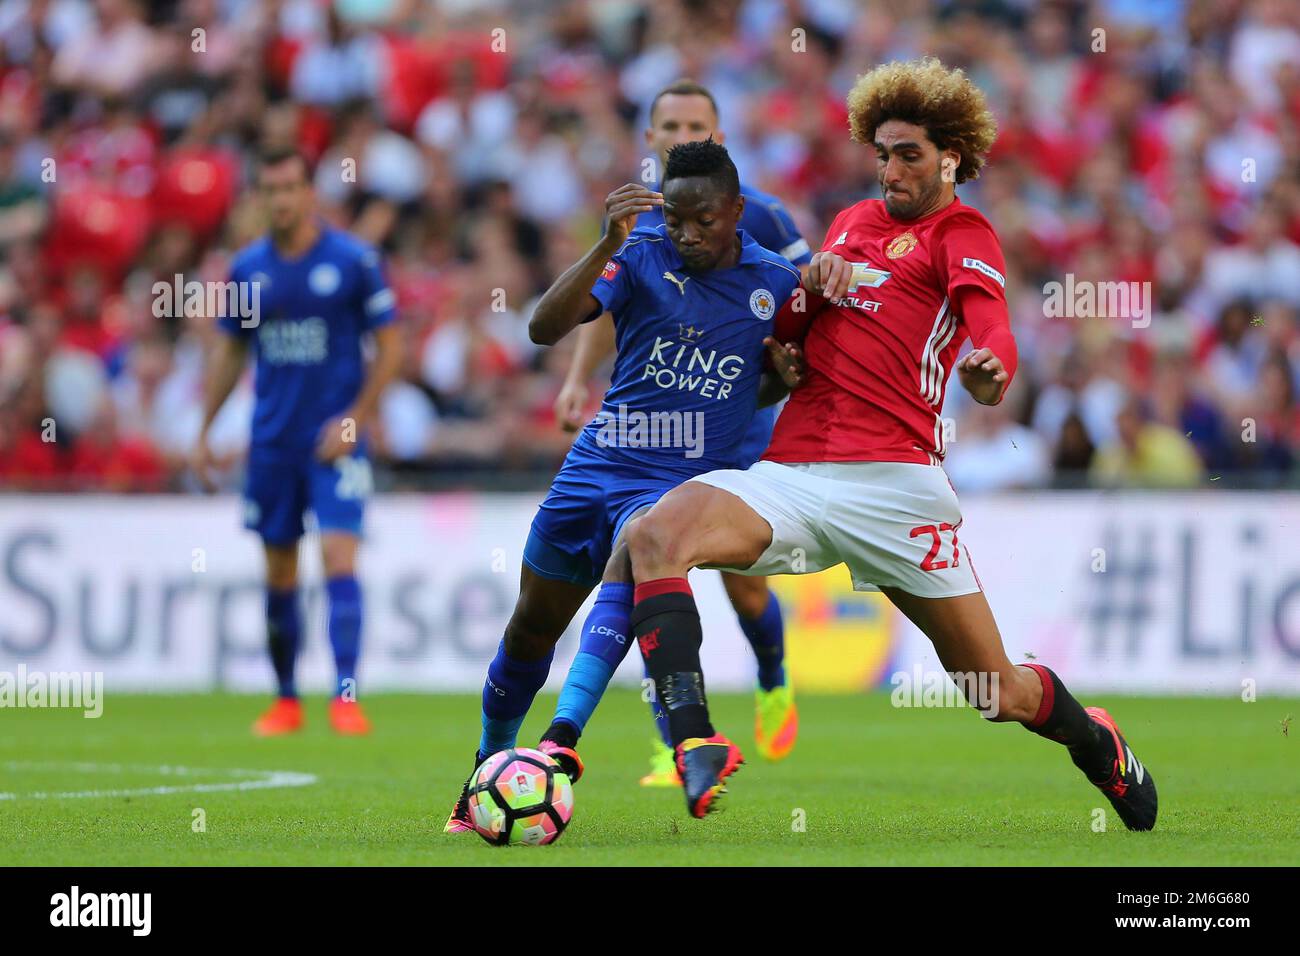 Marouane Fellaini of Manchester United and Ahmed Musa of Leicester City battle for possession - Leicester City v Manchester United, FA Community Shield, Wembley Stadium, London - 7th August 2016 Stock Photo